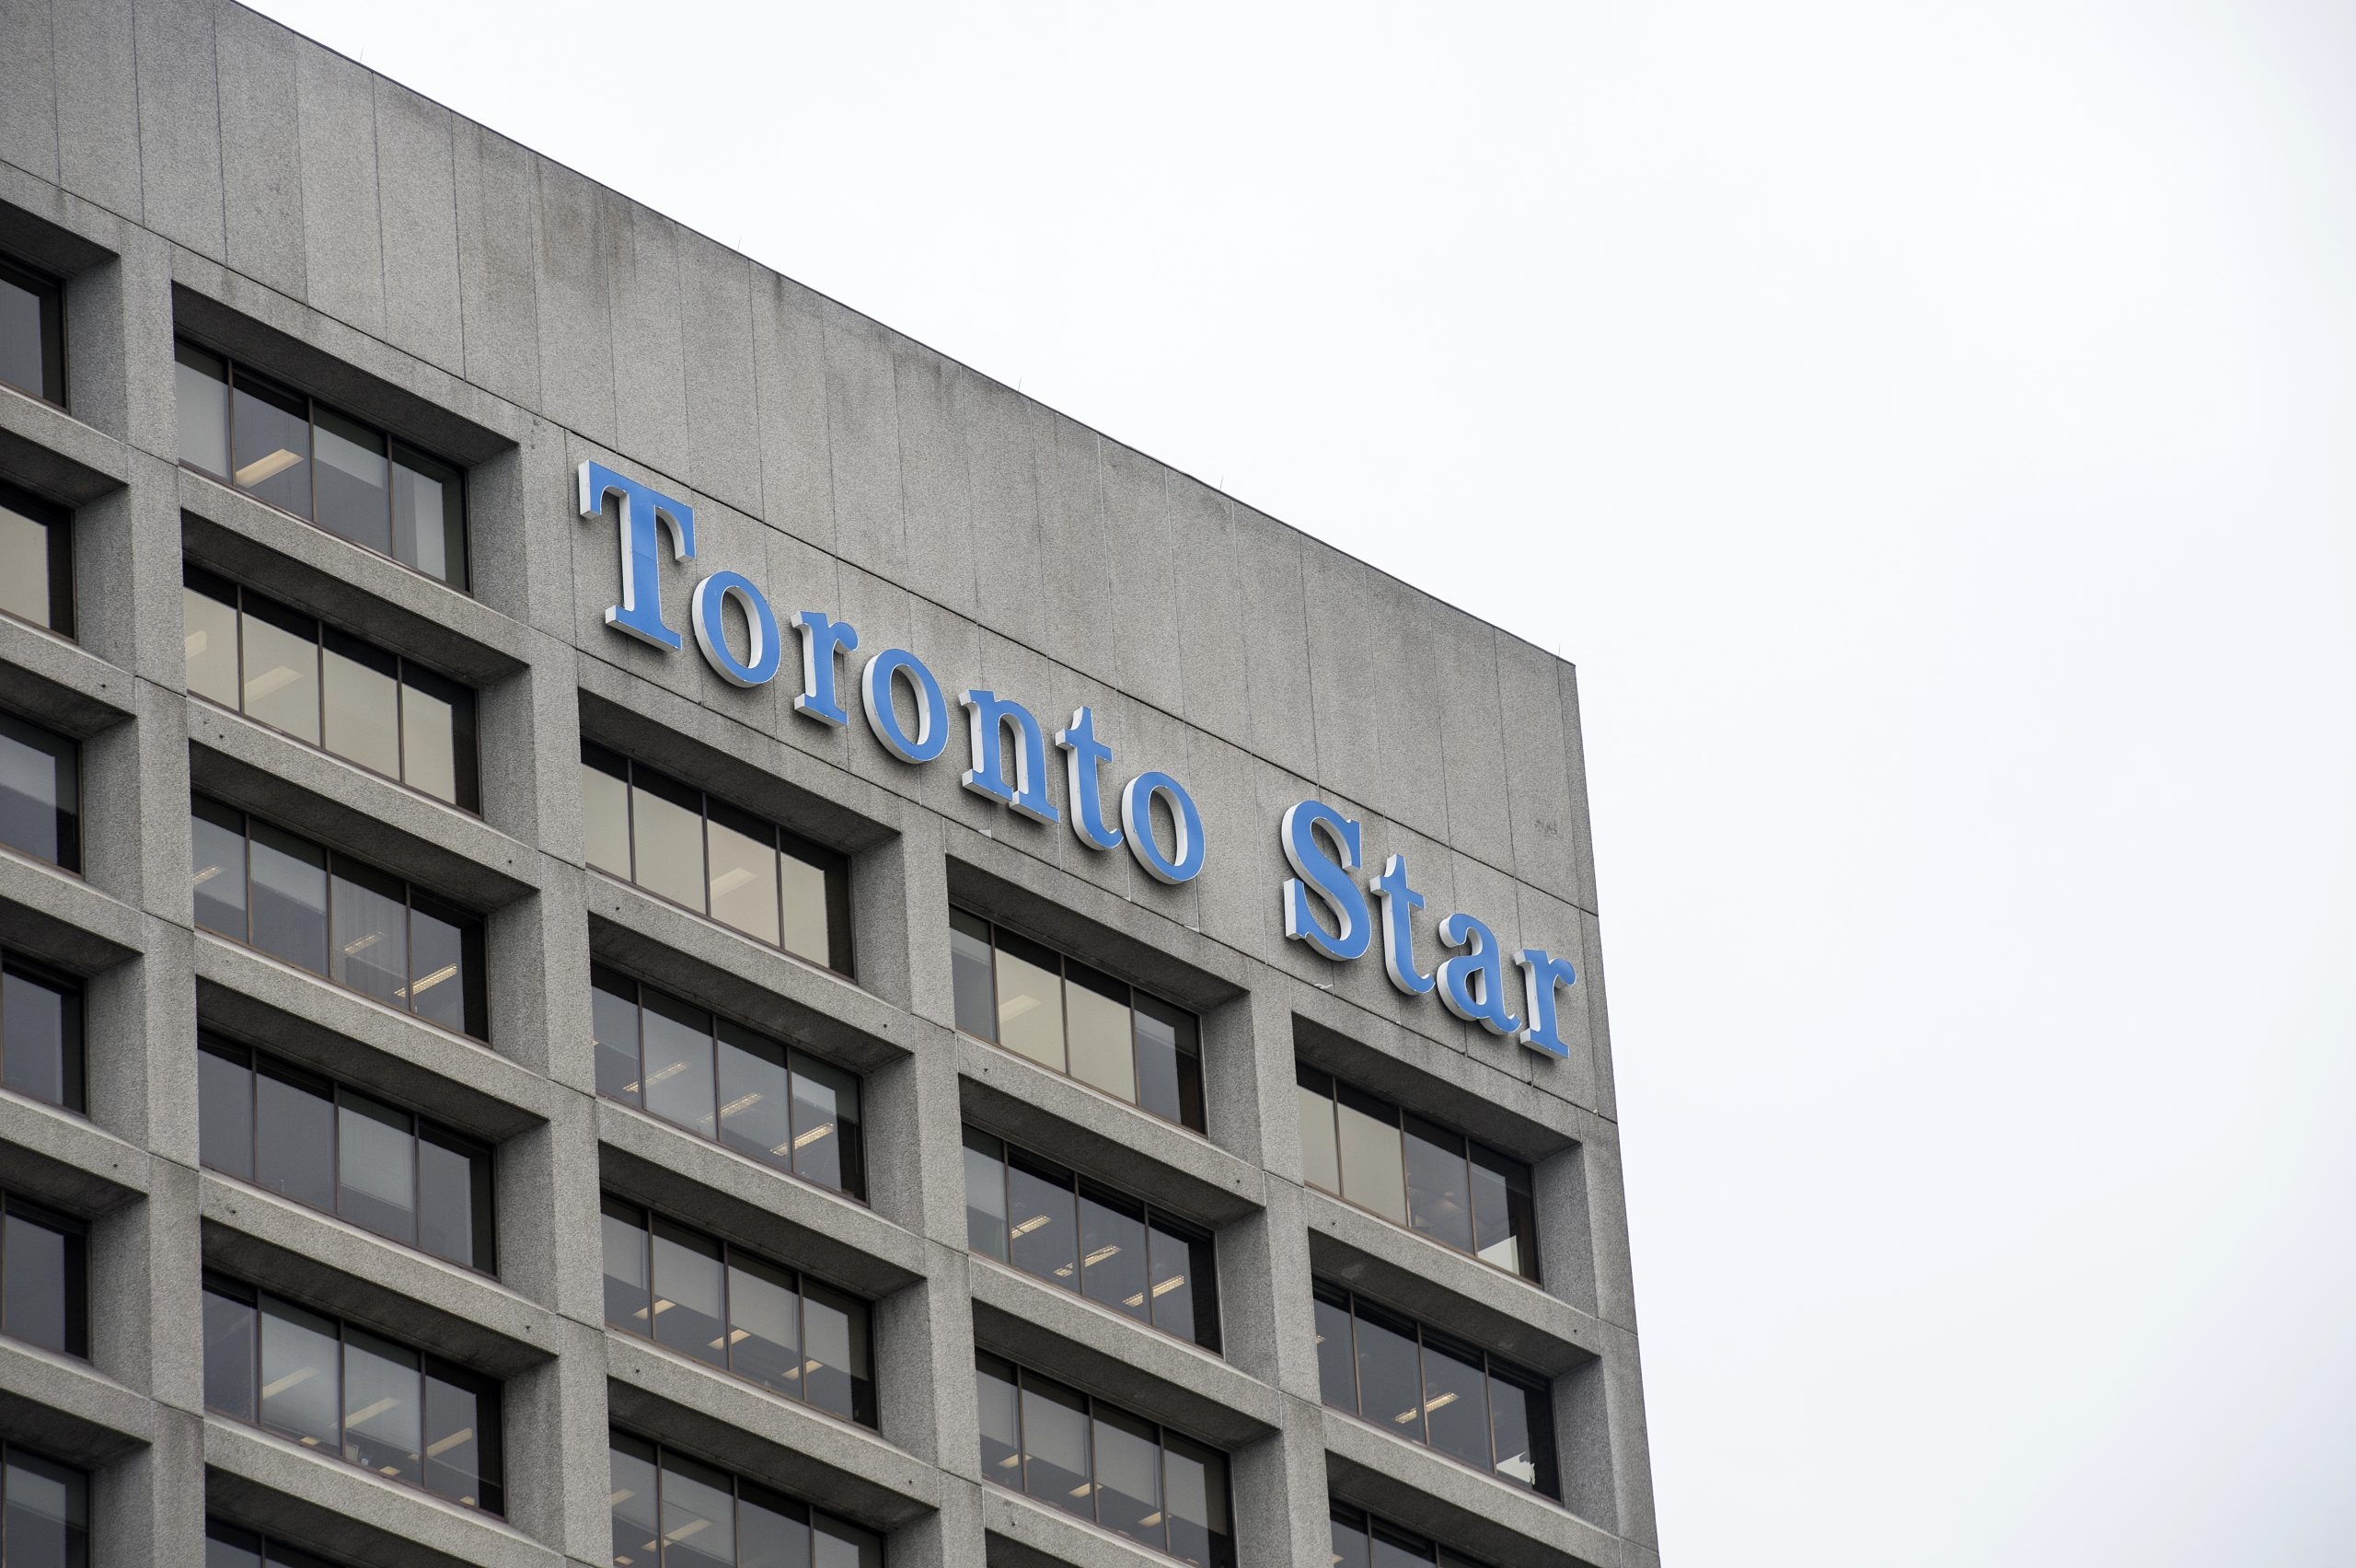 Toronto Star reporters withhold bylines from Wednesday edition in